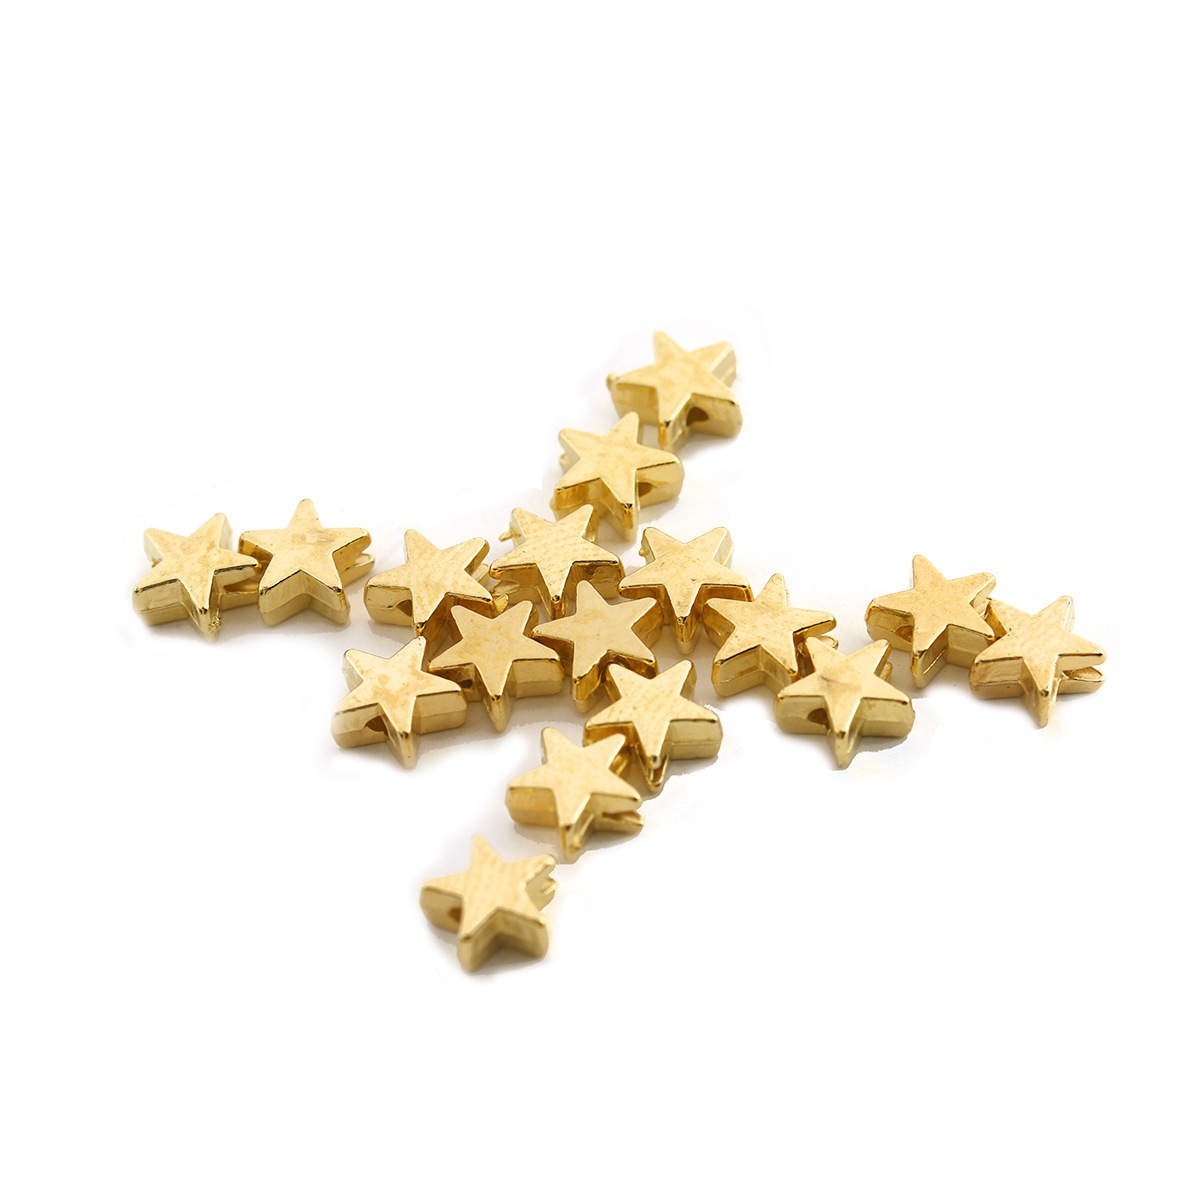 Gold five pointed star 6x6mm, 1mm